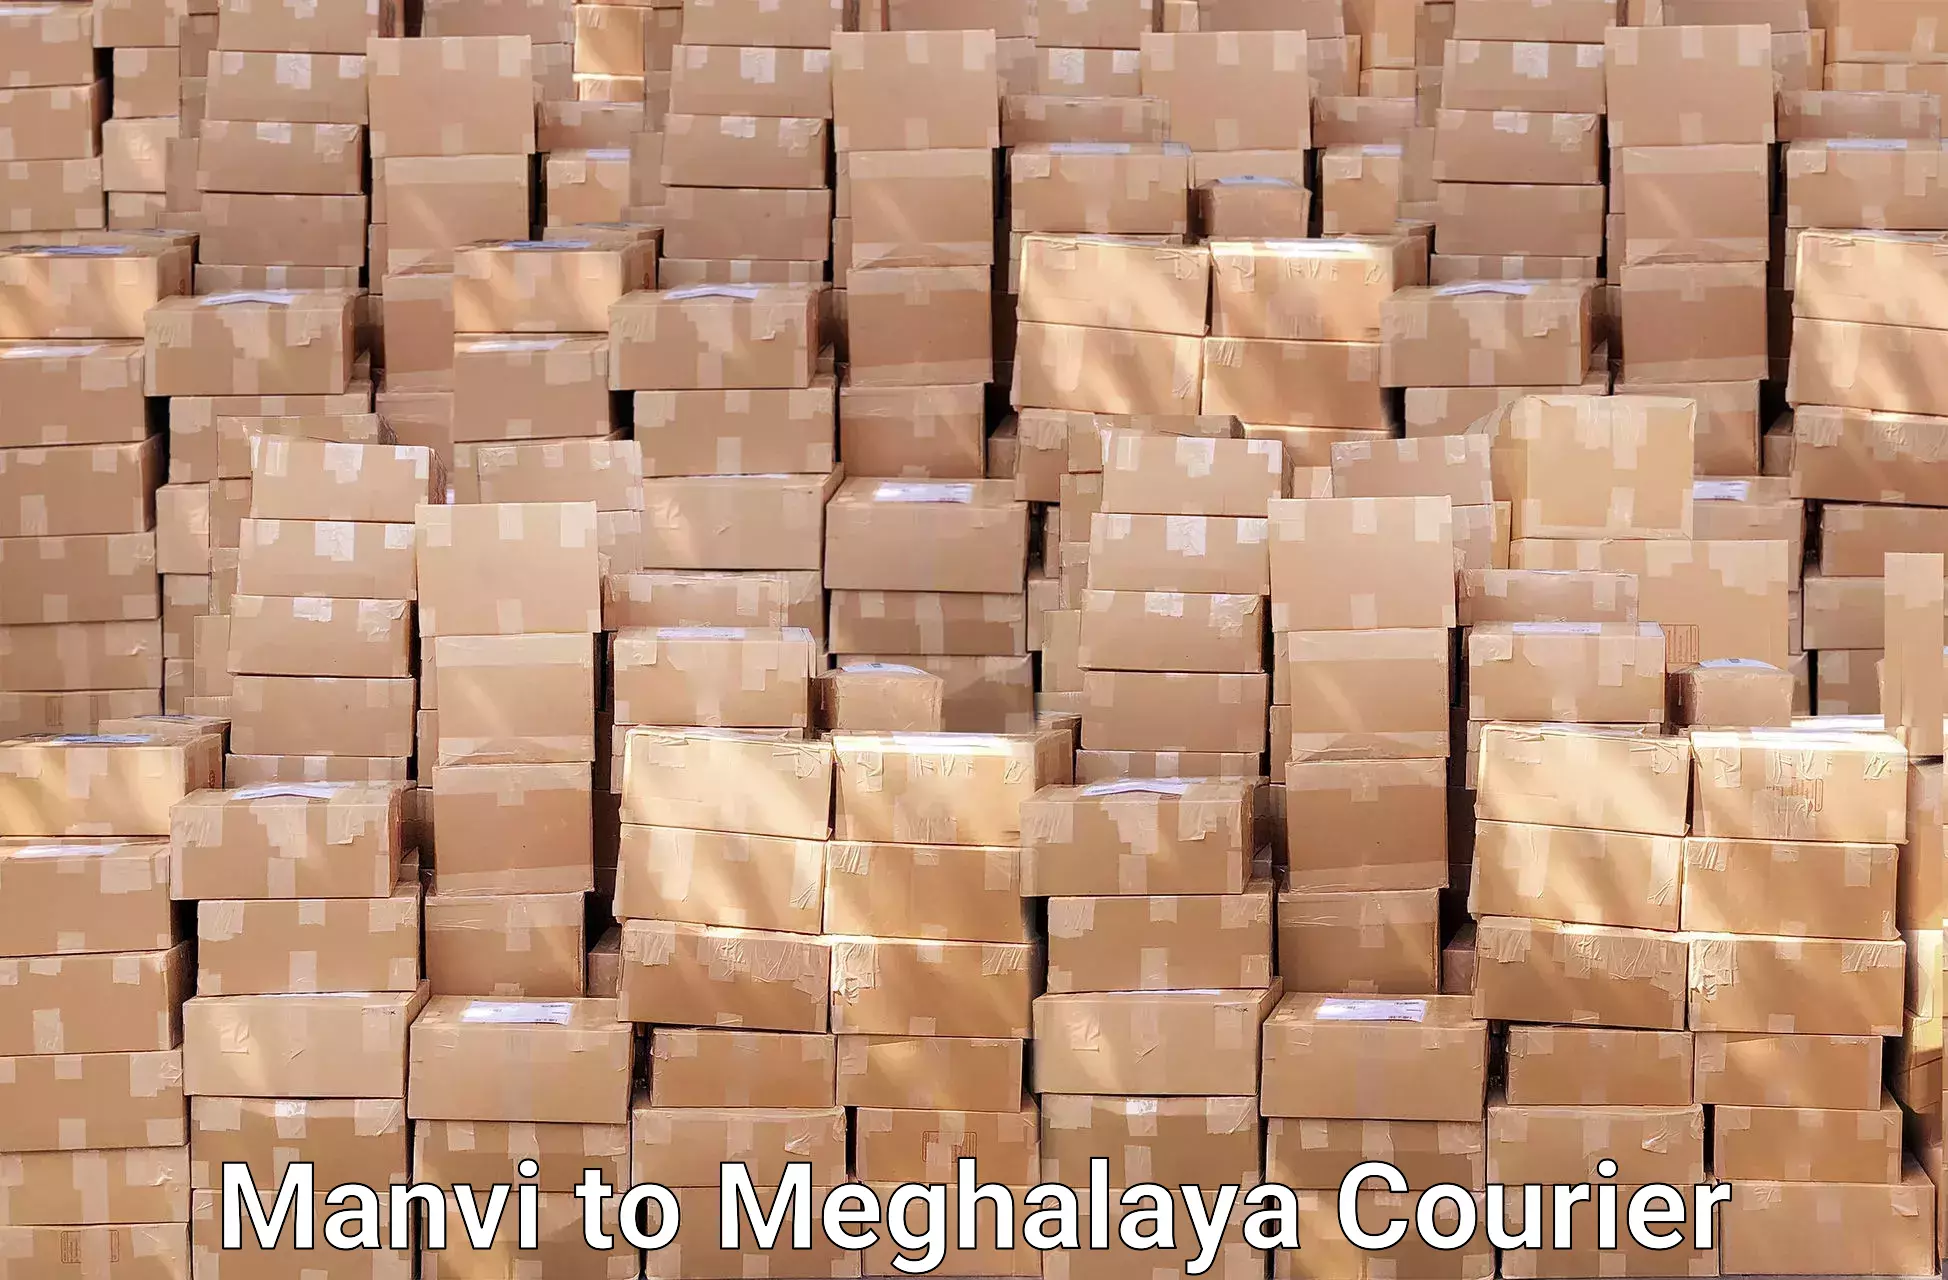 Moving and packing experts Manvi to Meghalaya